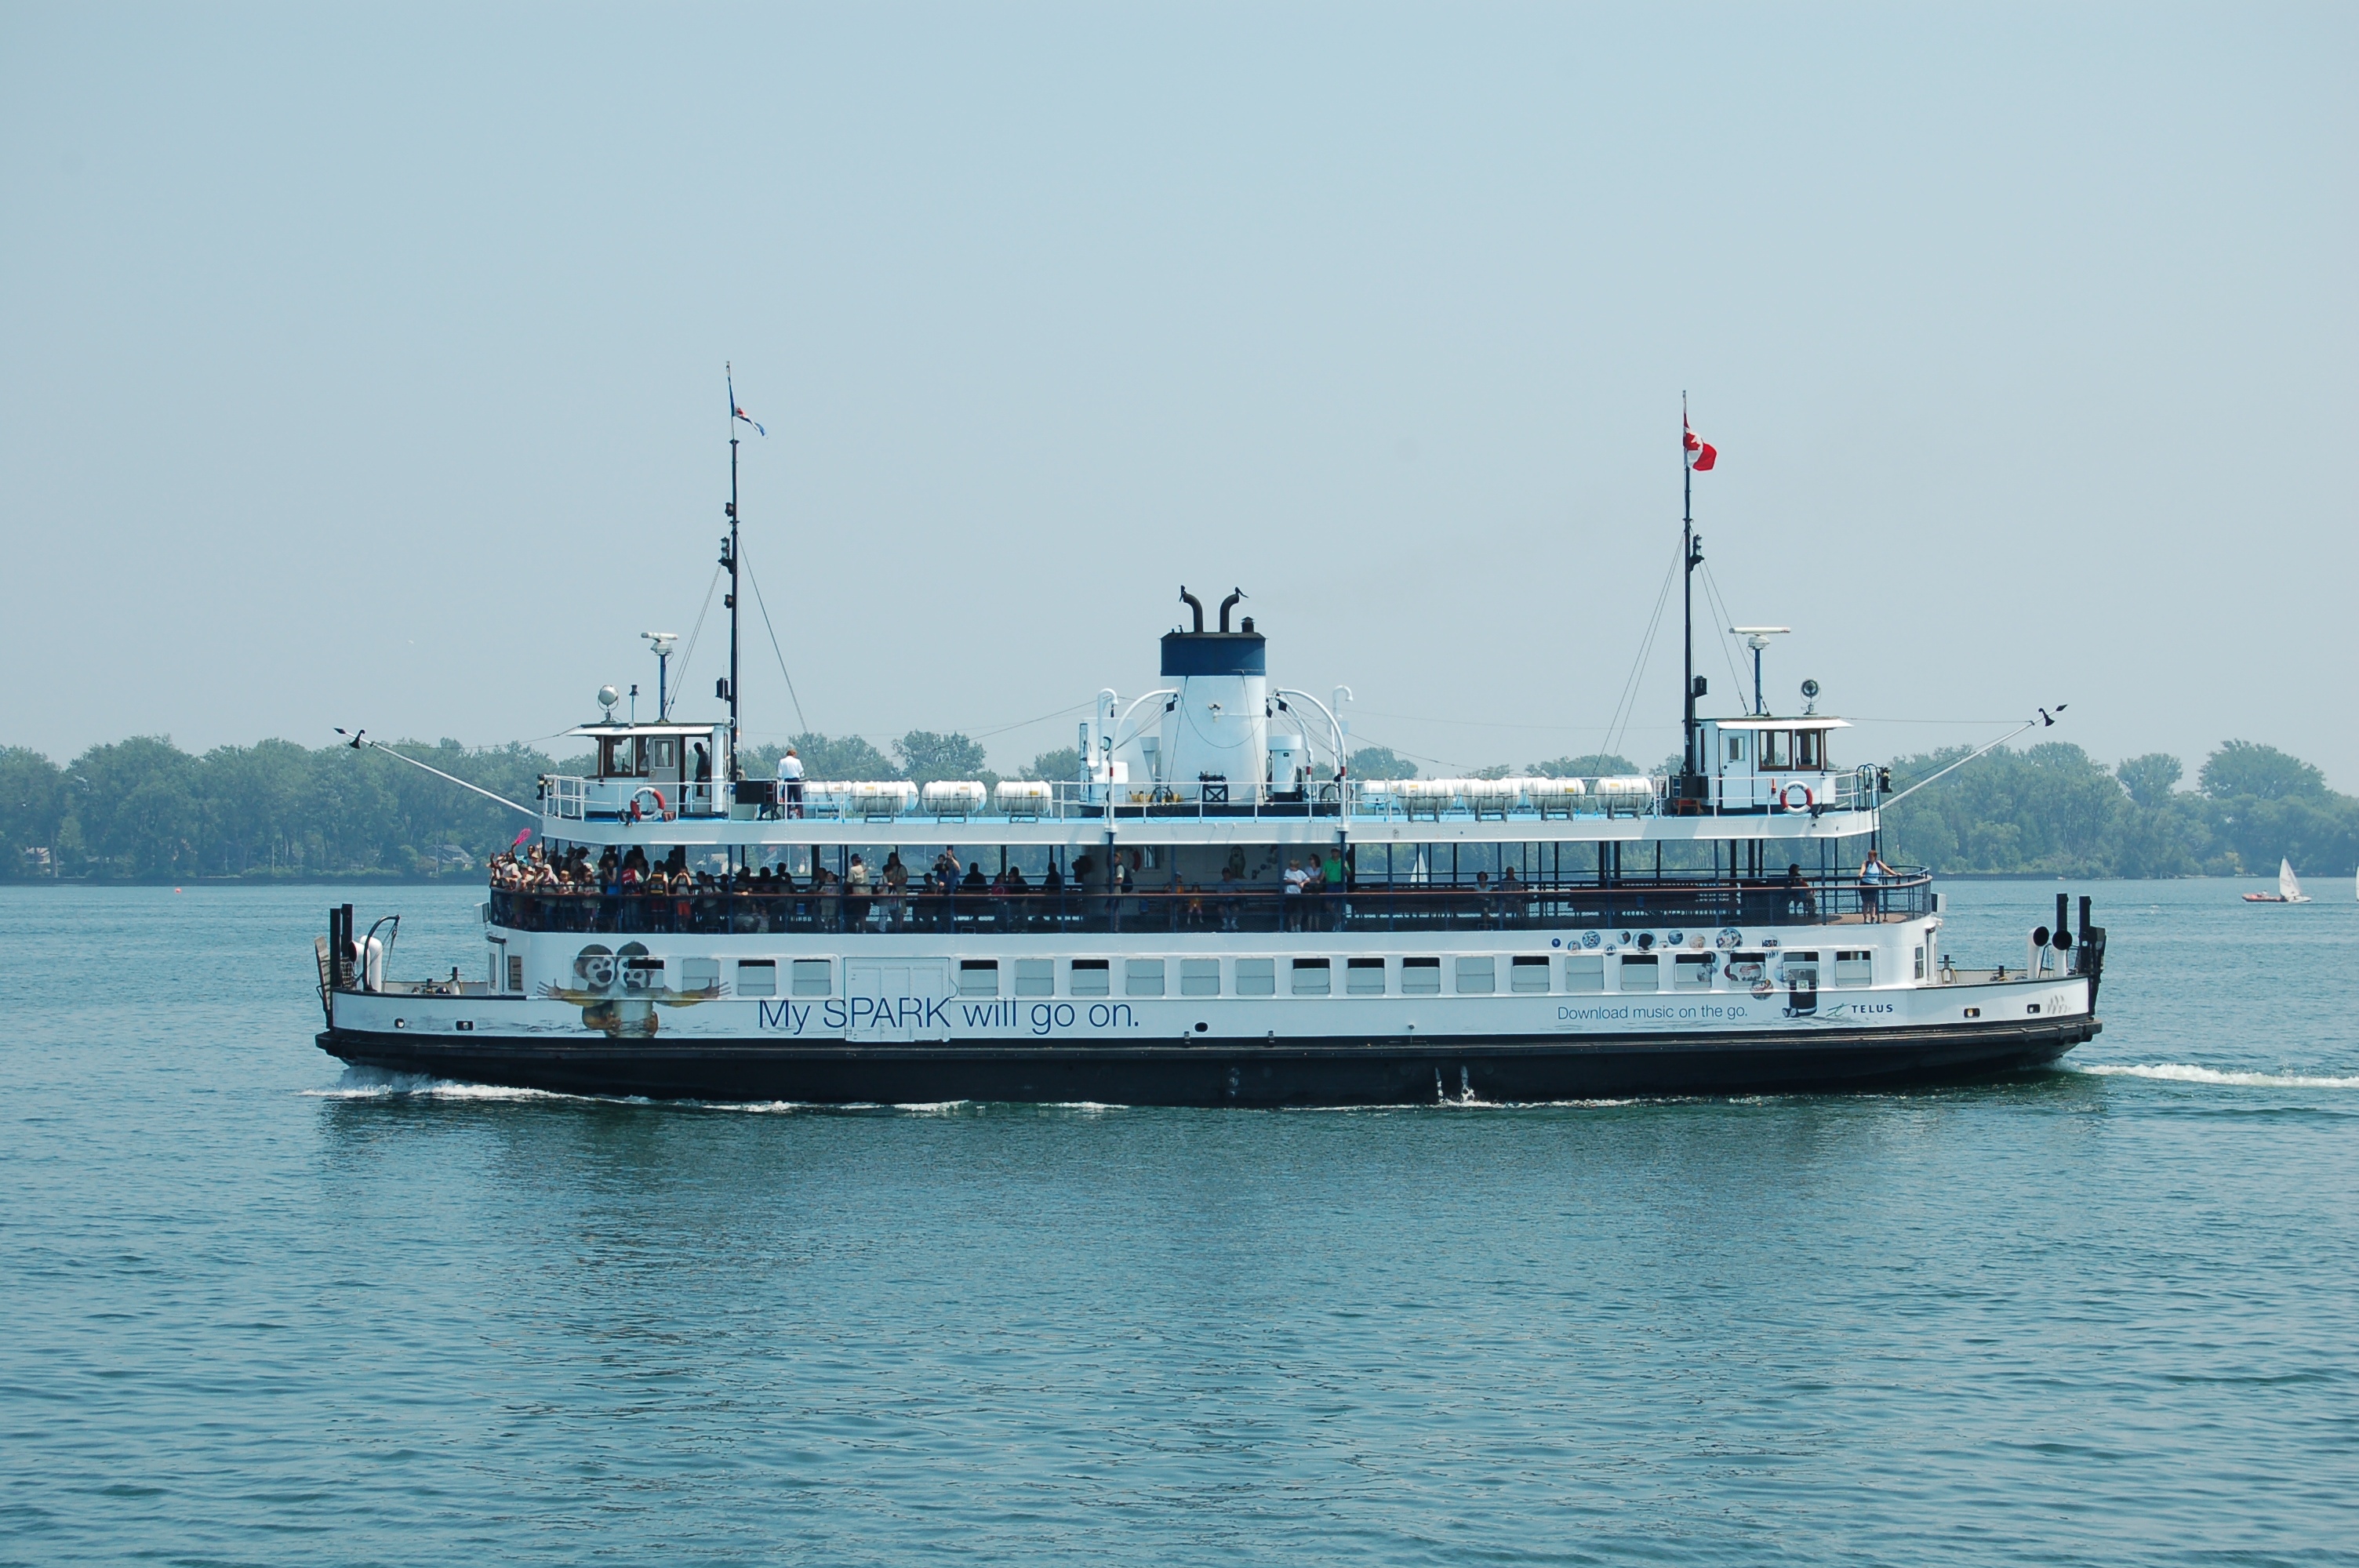 File:A Ferry, Toronto Harbour.jpg - Wikimedia Commons